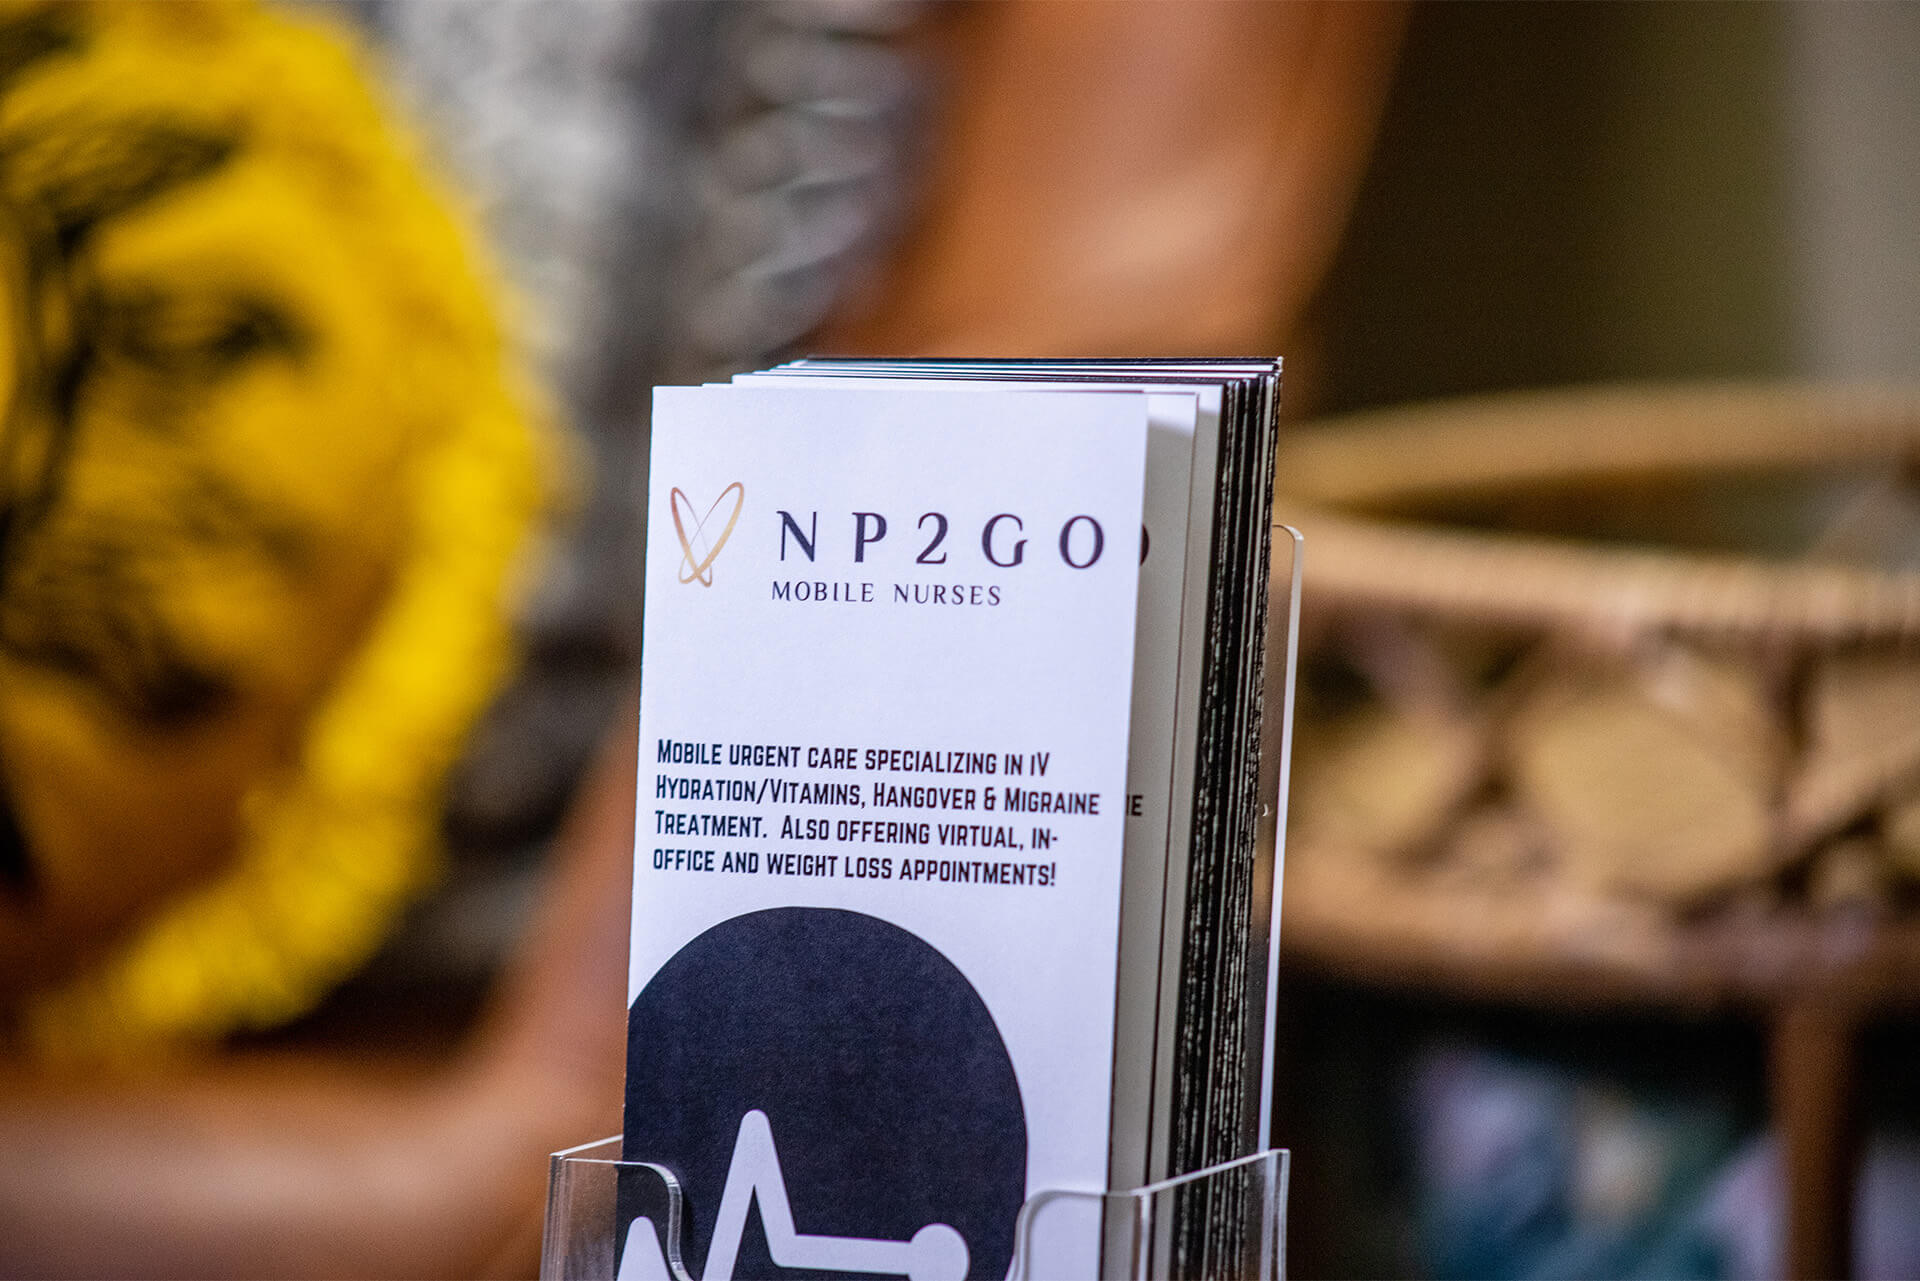 A stack of NP2GO business cards.